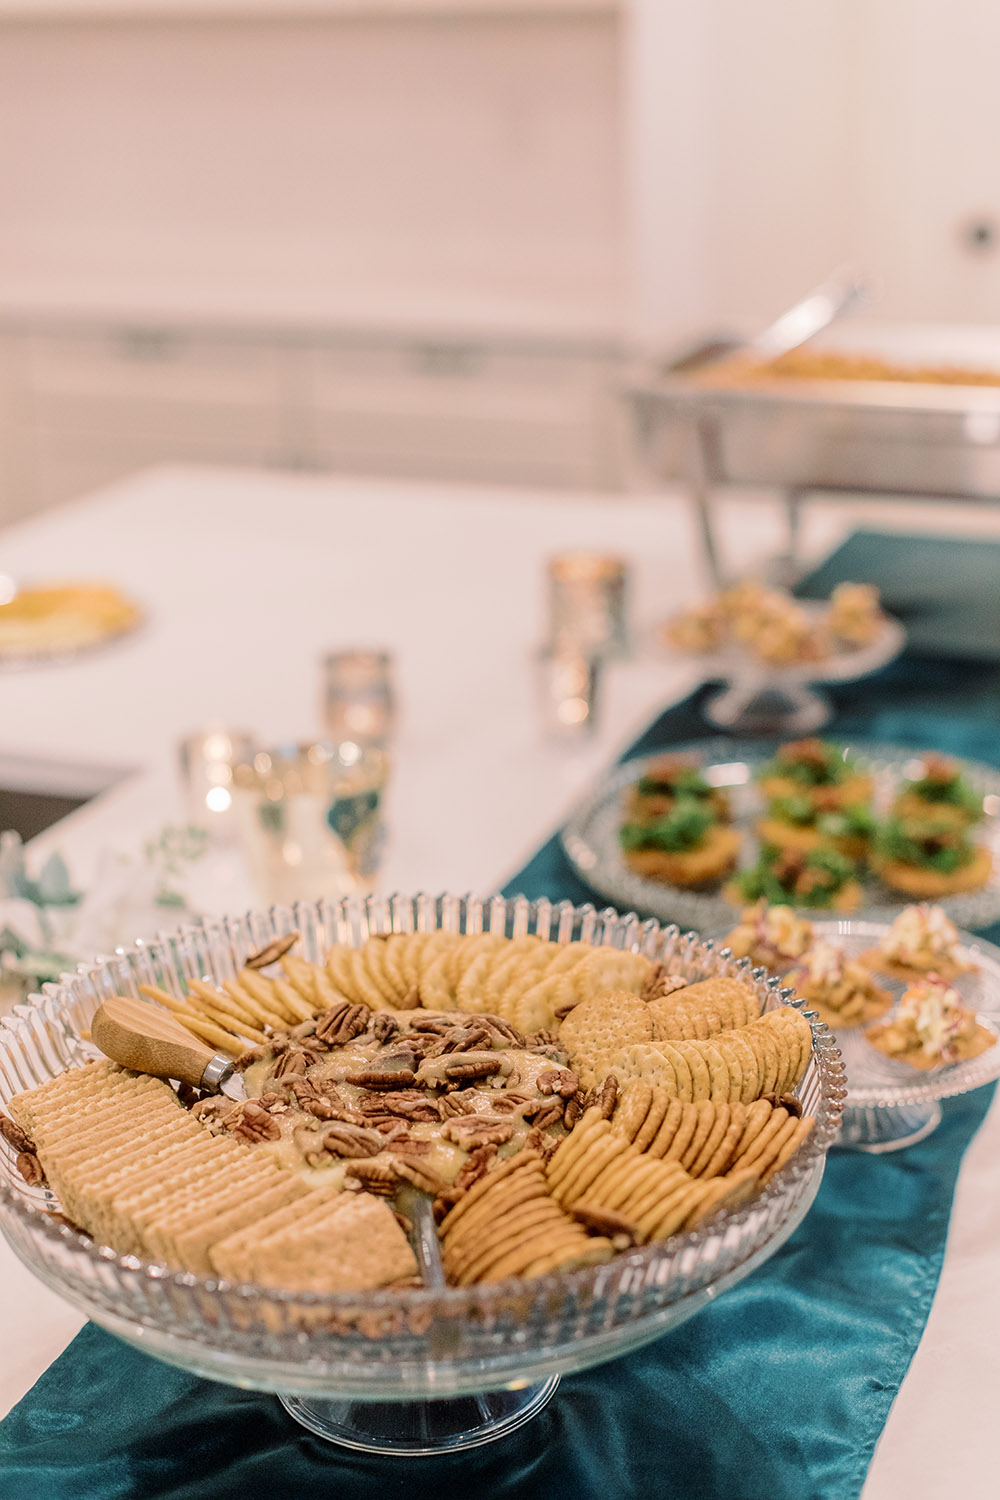 Brie and crackers display. Photo: Ashley Kristen Photography